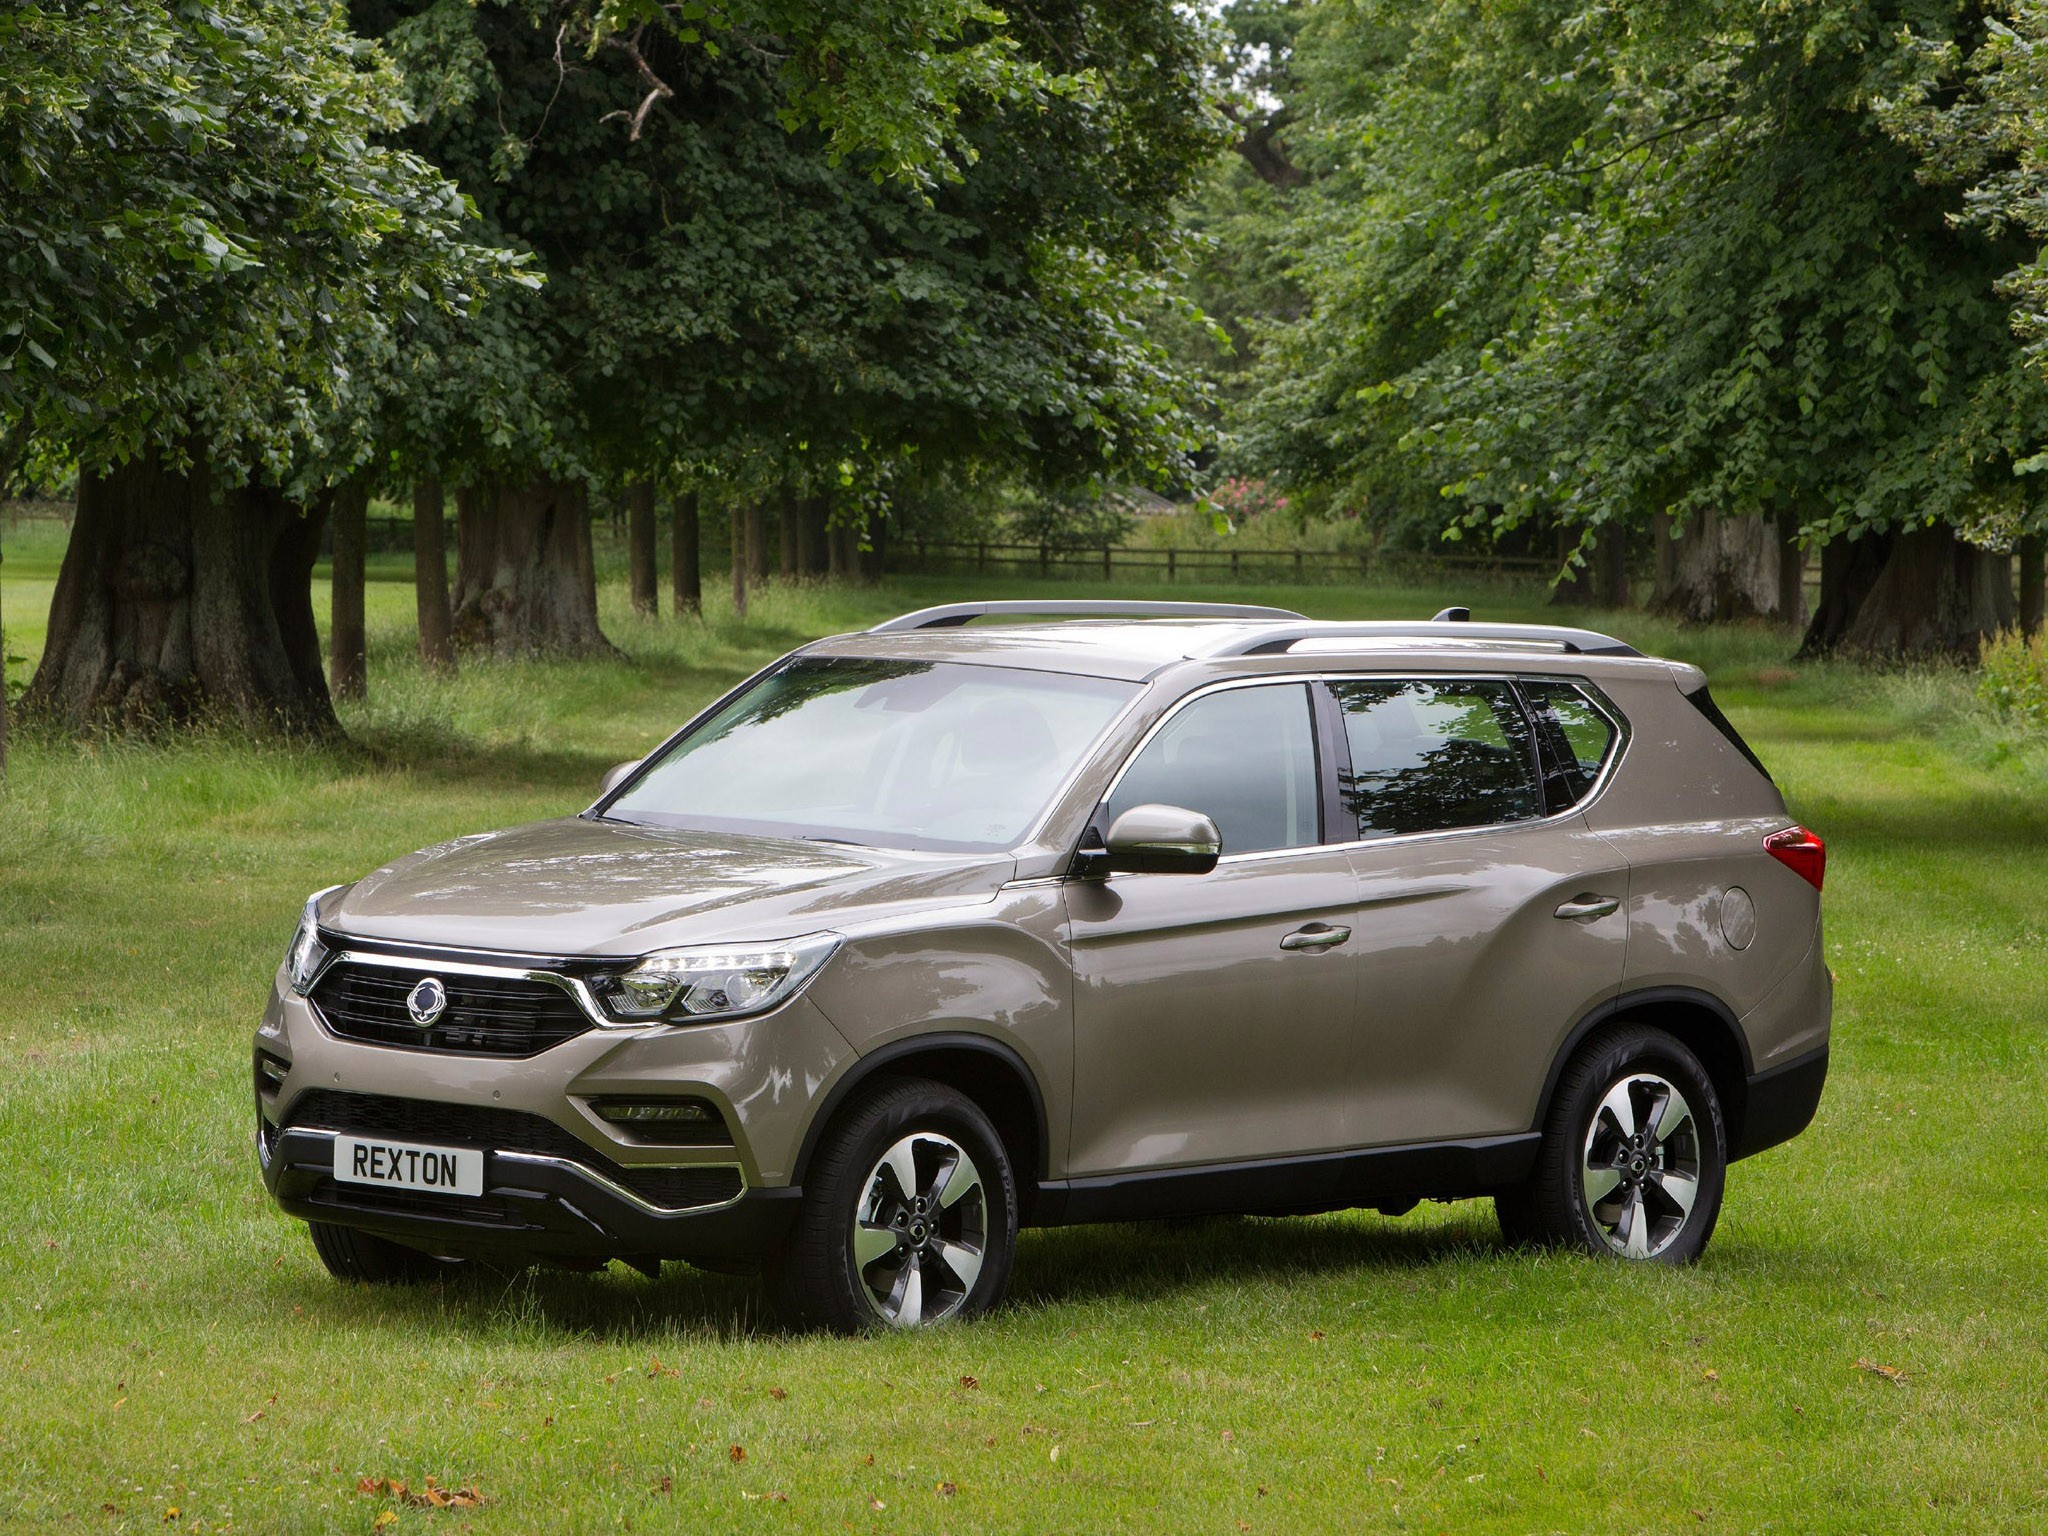 SsangYong Rexton Y400 2017